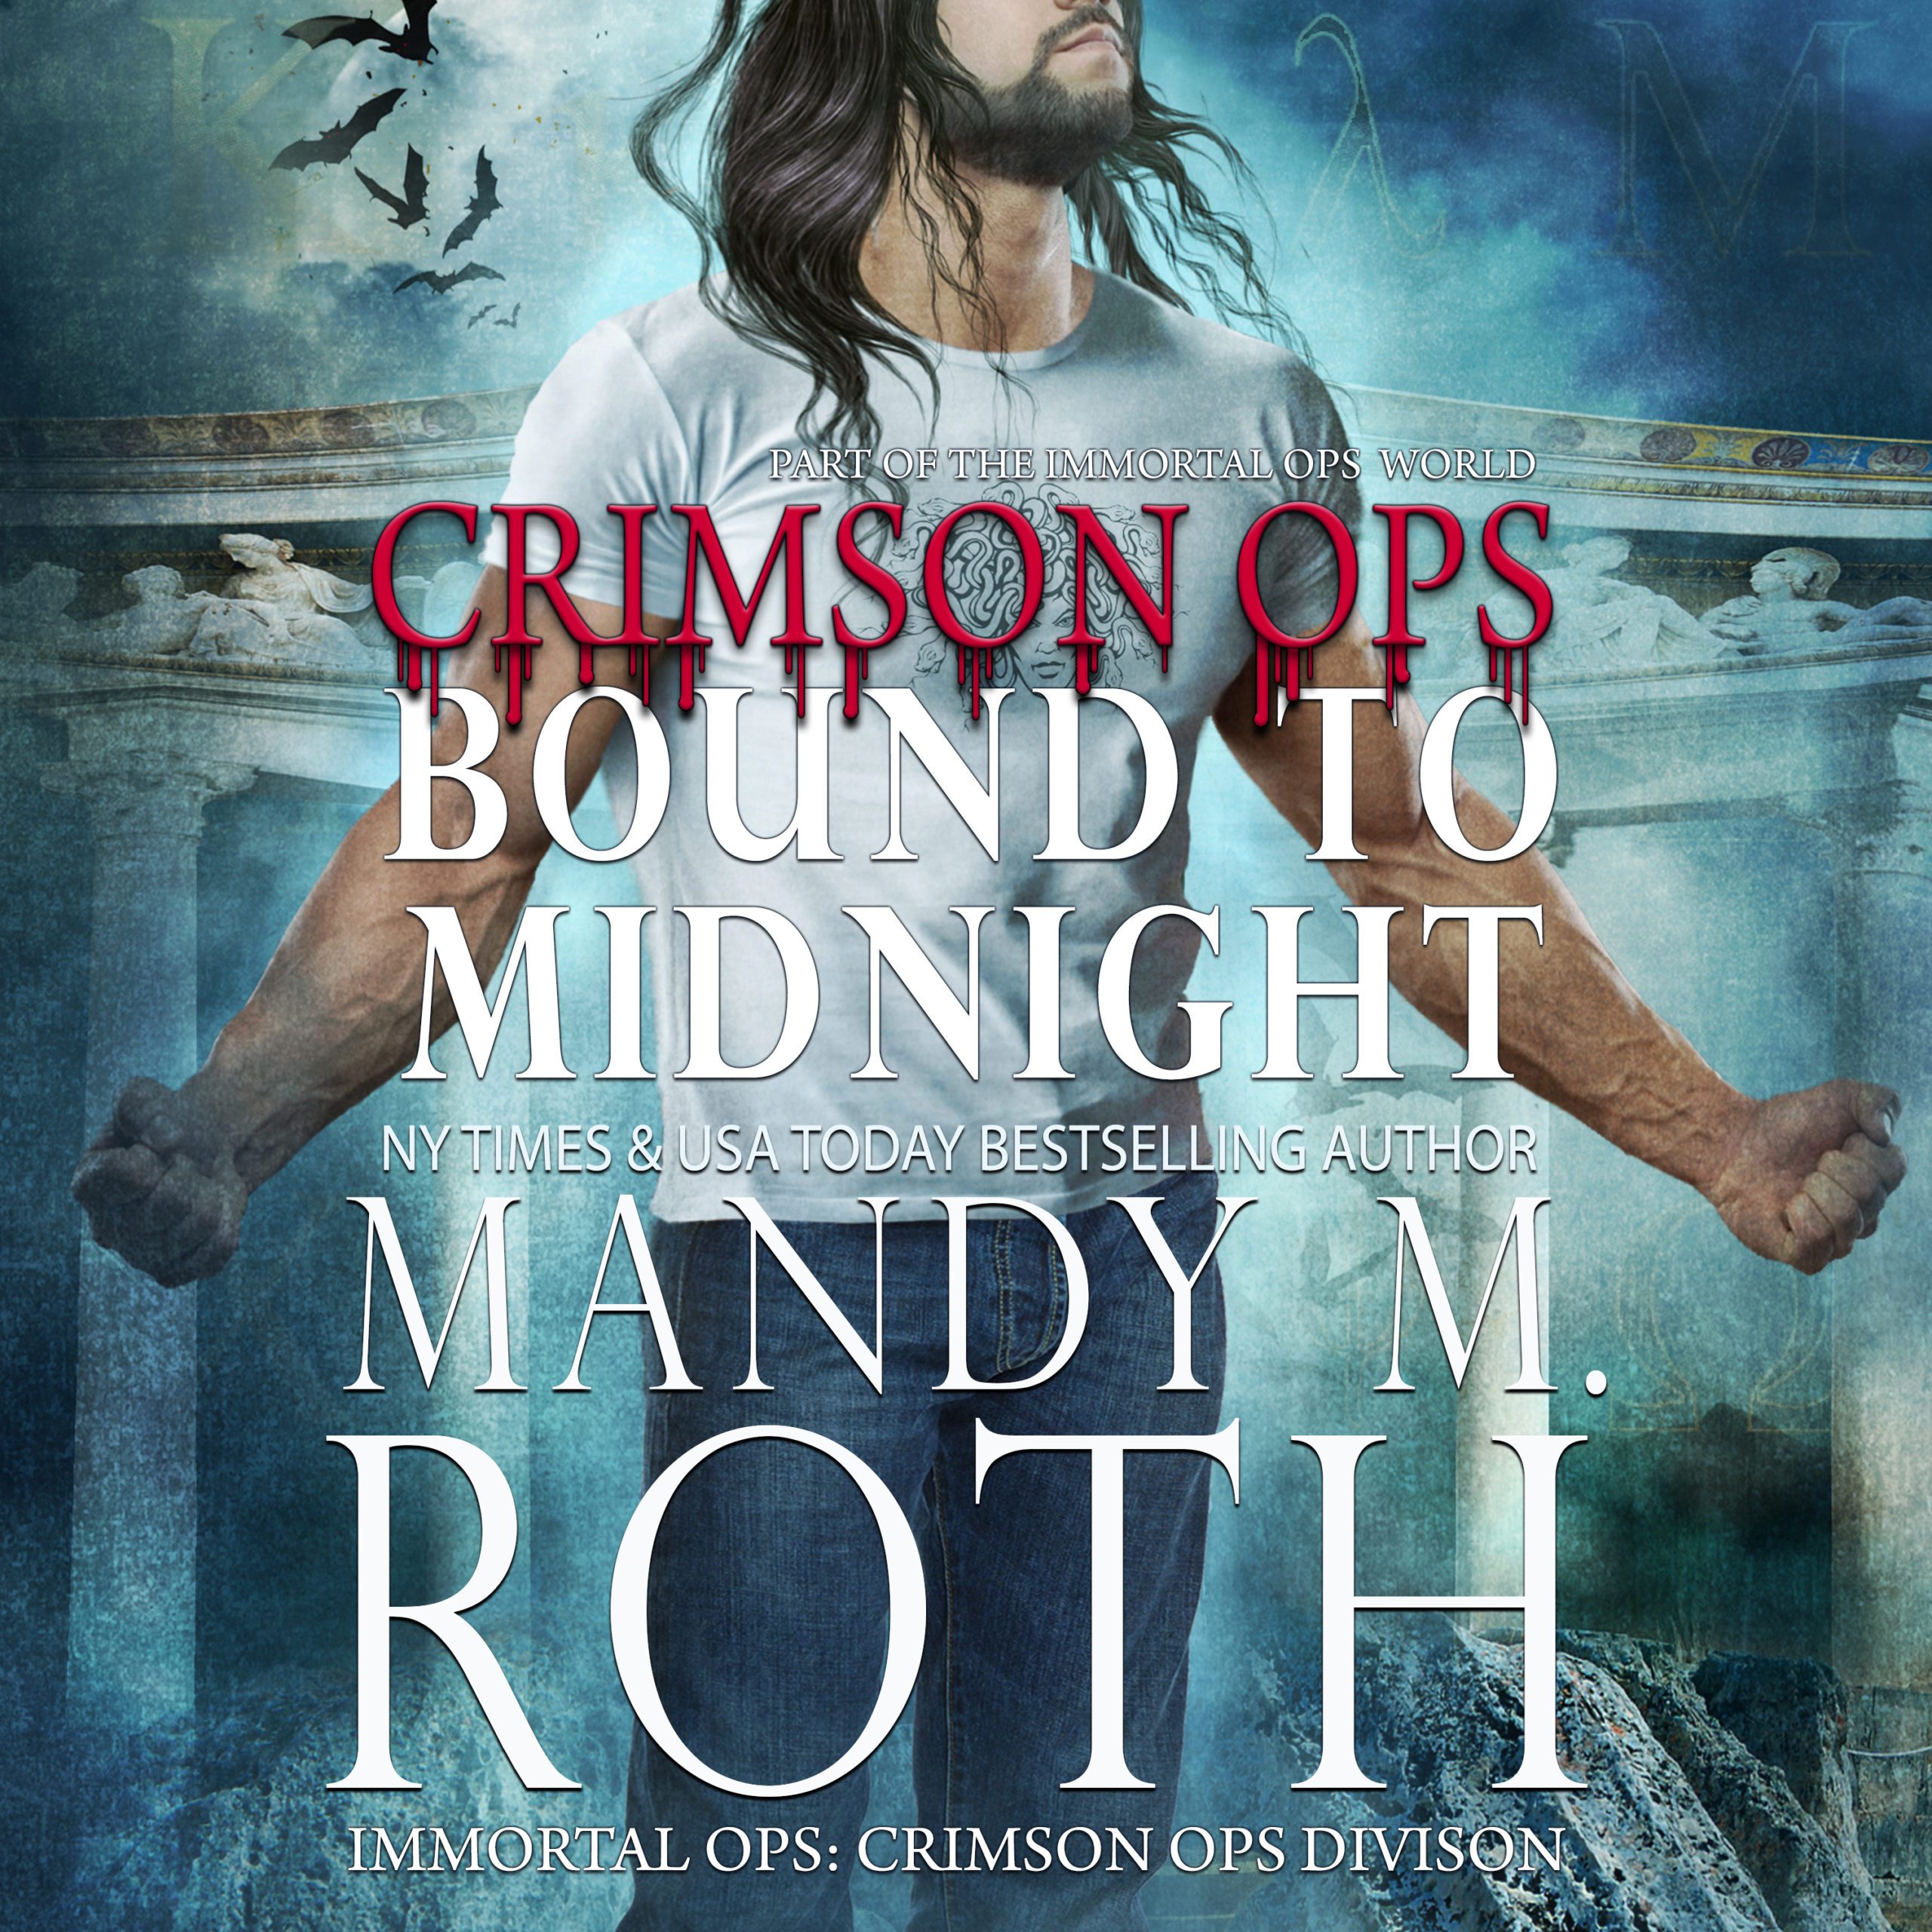 Audiobook proofing for Bound to Midnight by Mandy M. Roth